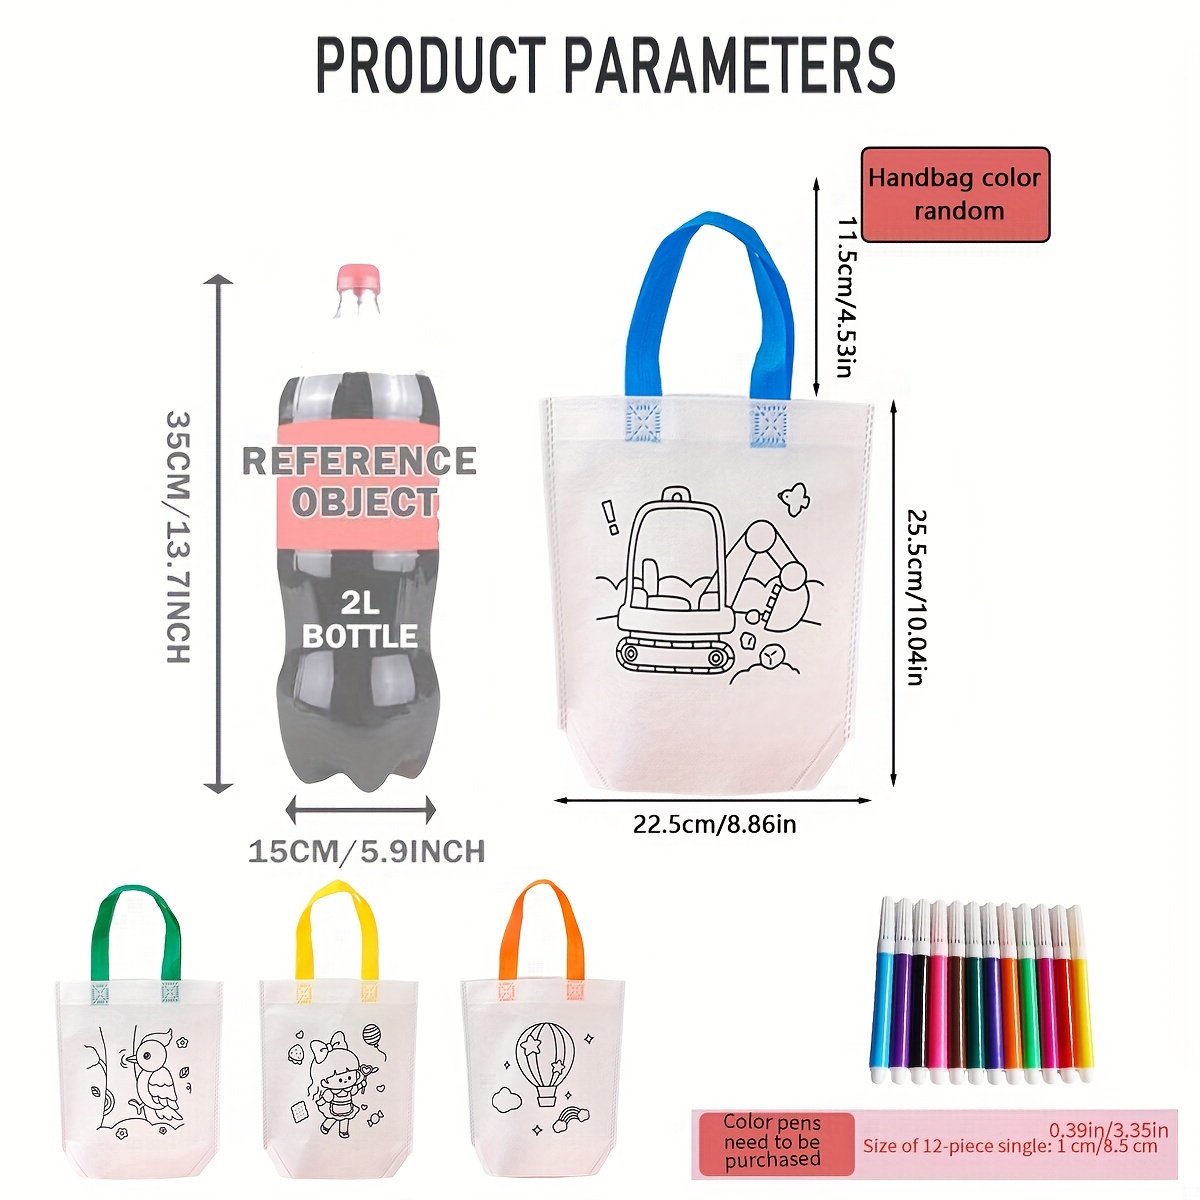 Diy Graffiti Bag Without Coloring Marker Carnival Animal Art Party Goodie  Bags For Kids Eco Reusable Mini Non-Woven Shopping Bag